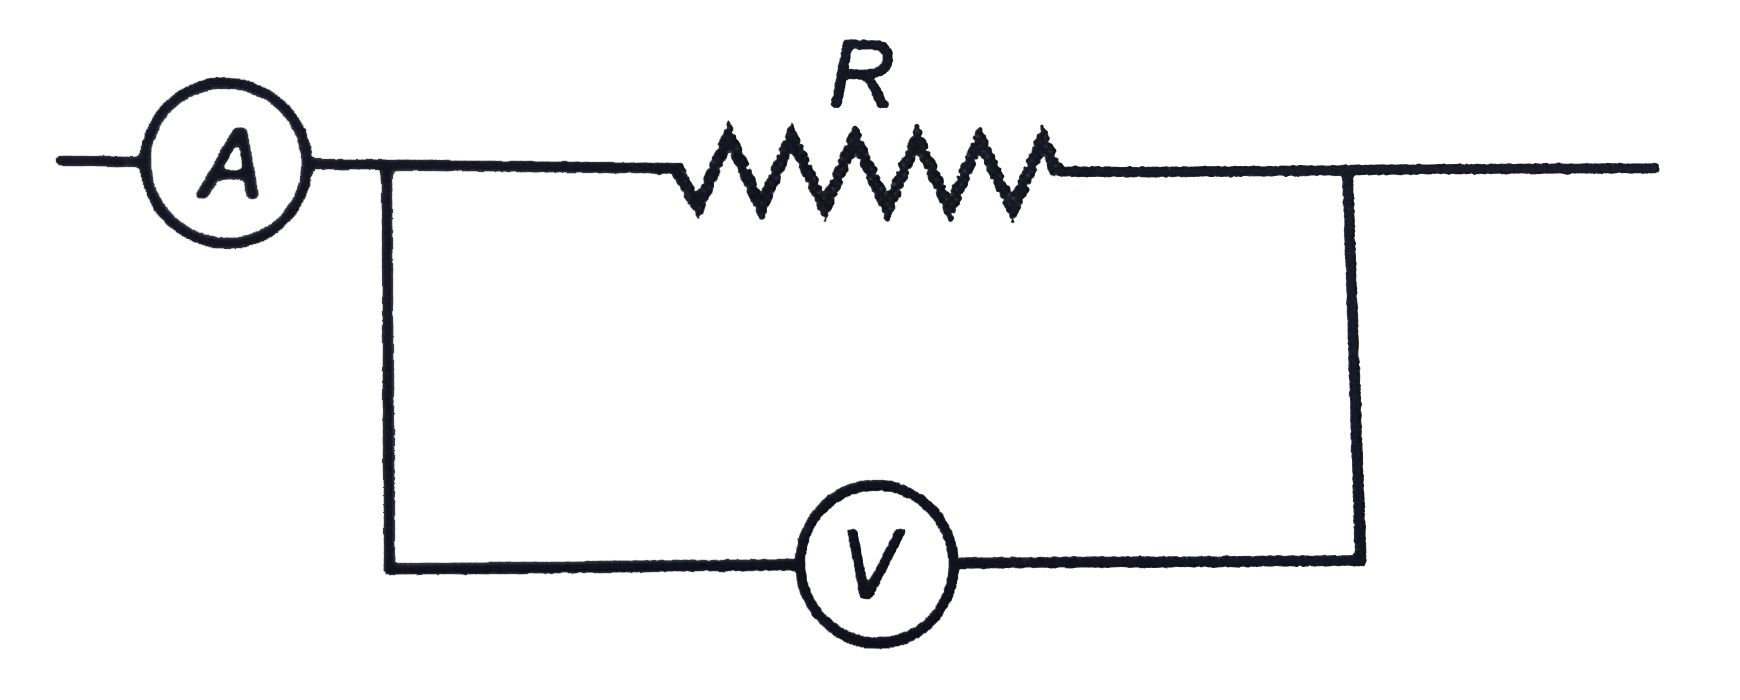 A part of a circuit is shown in figure. Here reading of ammeter is 5A and voltmeter is 100 V. If voltmeter resistance is 2500 ohm, then the resistance R is approximately